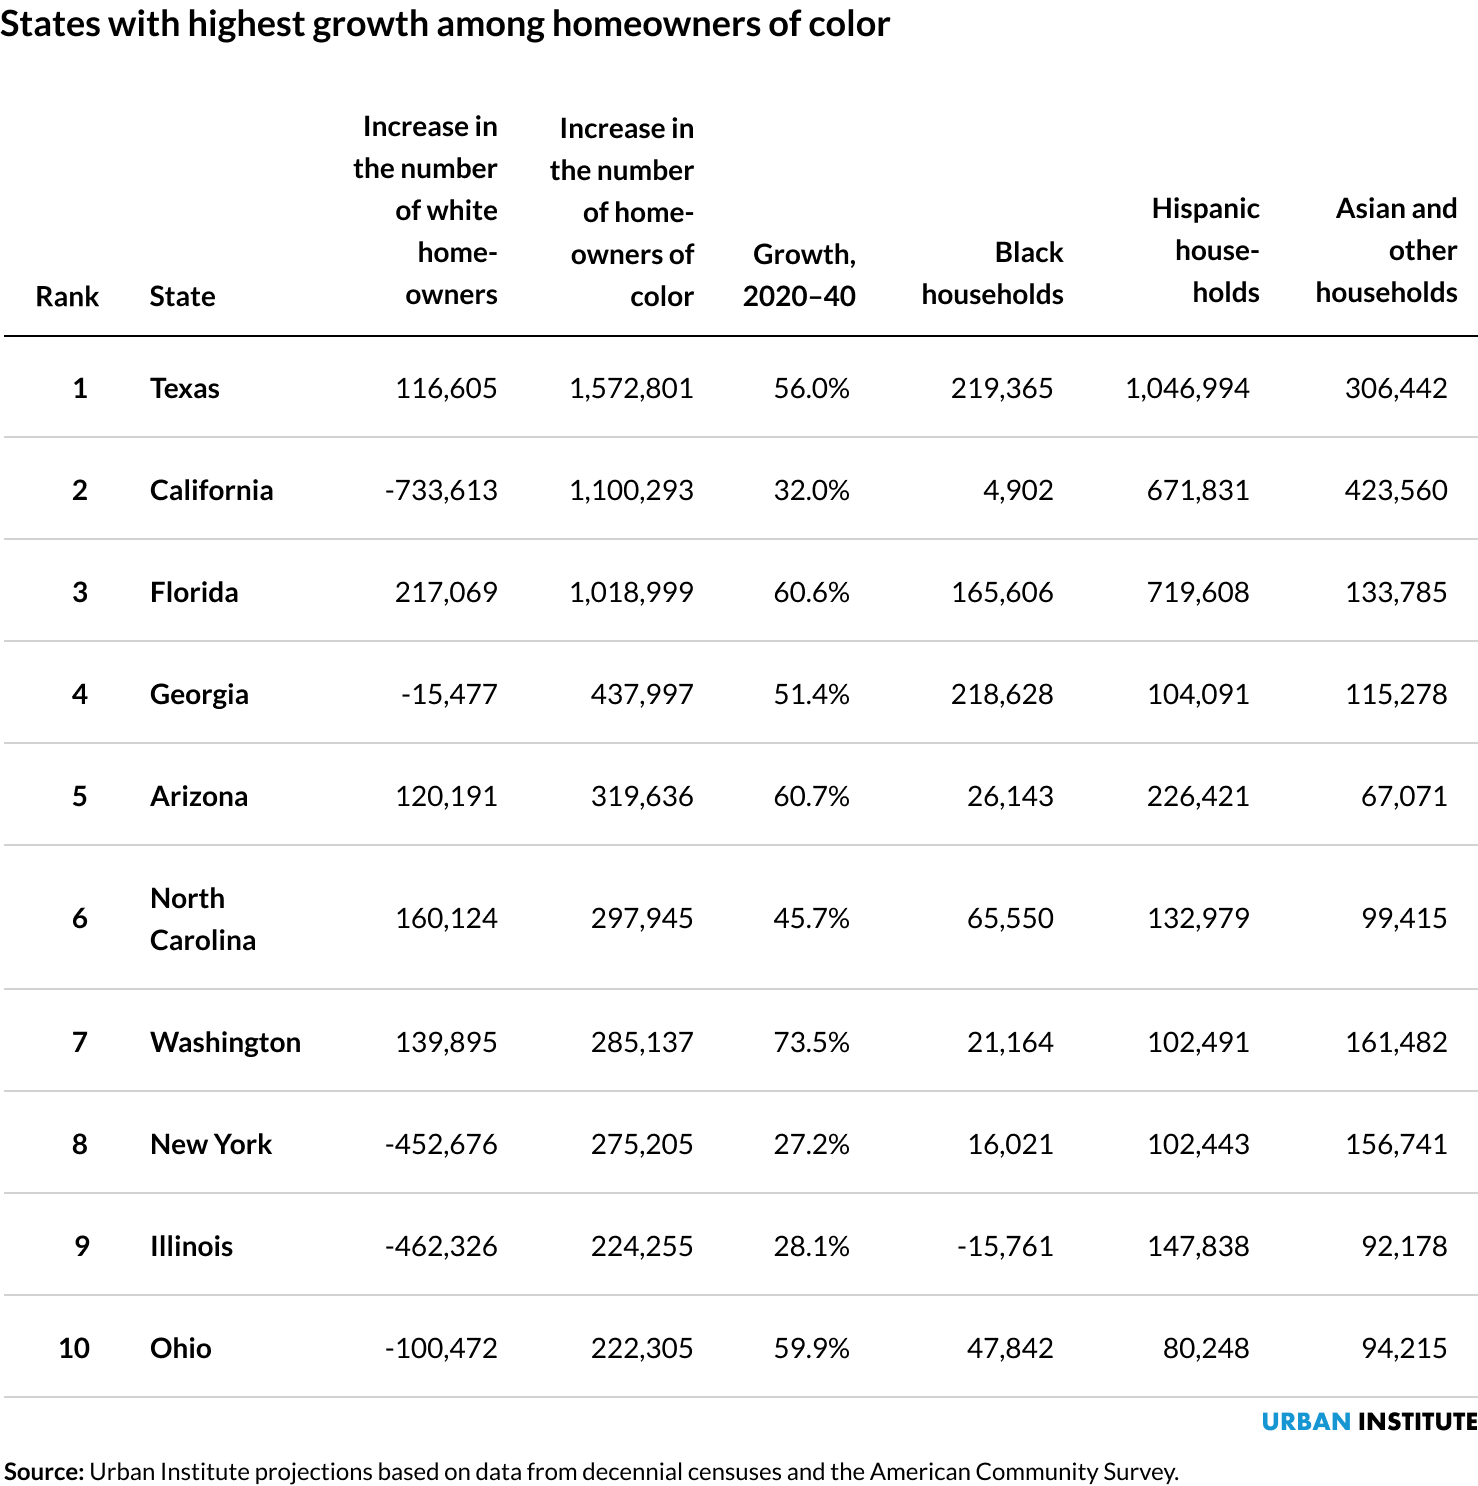 Table showing states with the highest growth among homeowners of color from 2020 to 2040